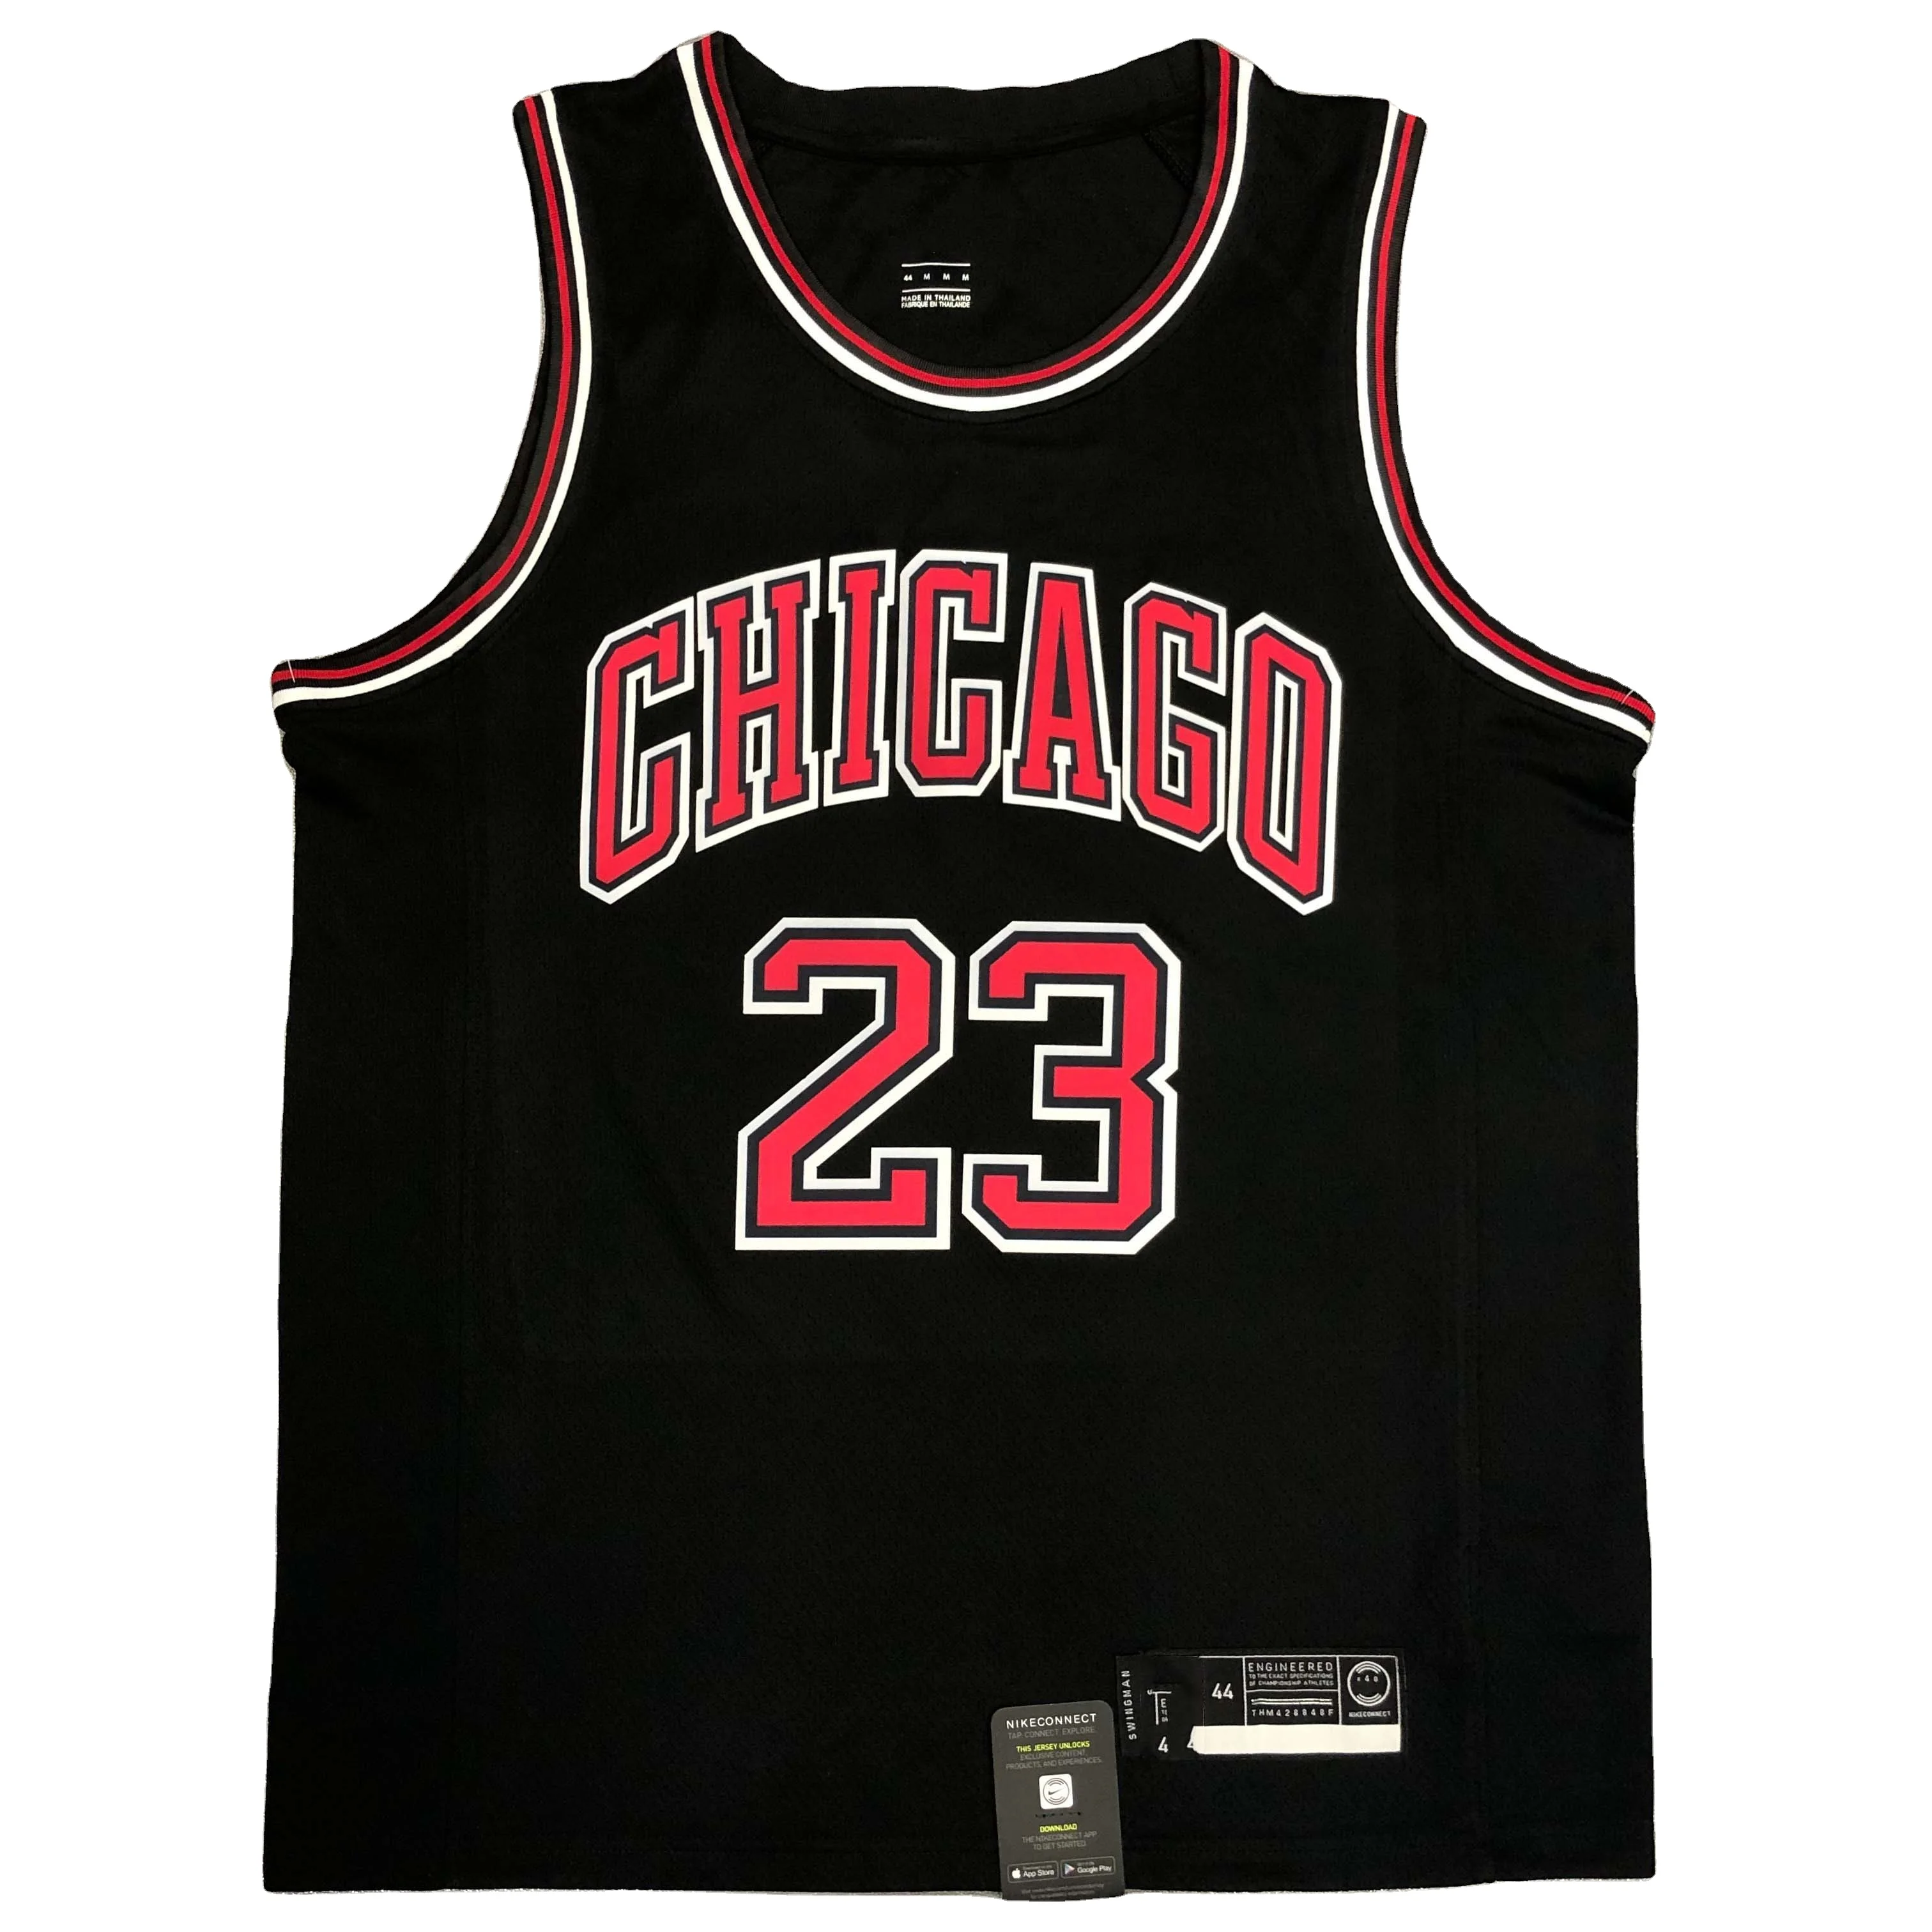 

Chicago Jordan No. 23 basketball jersey Bulls jersey for the 2021 season, As picture